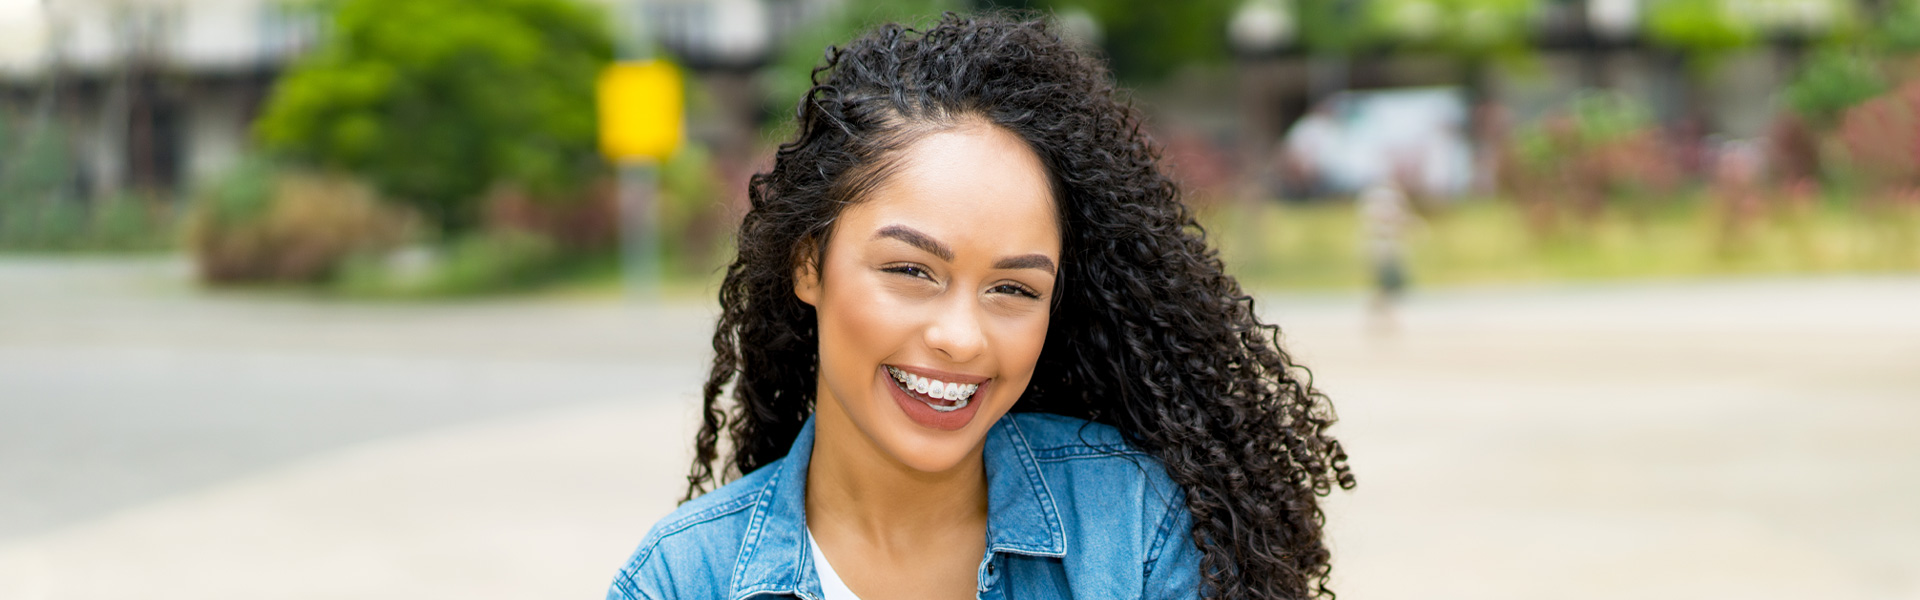 What Are The Benefits of Clear Braces?